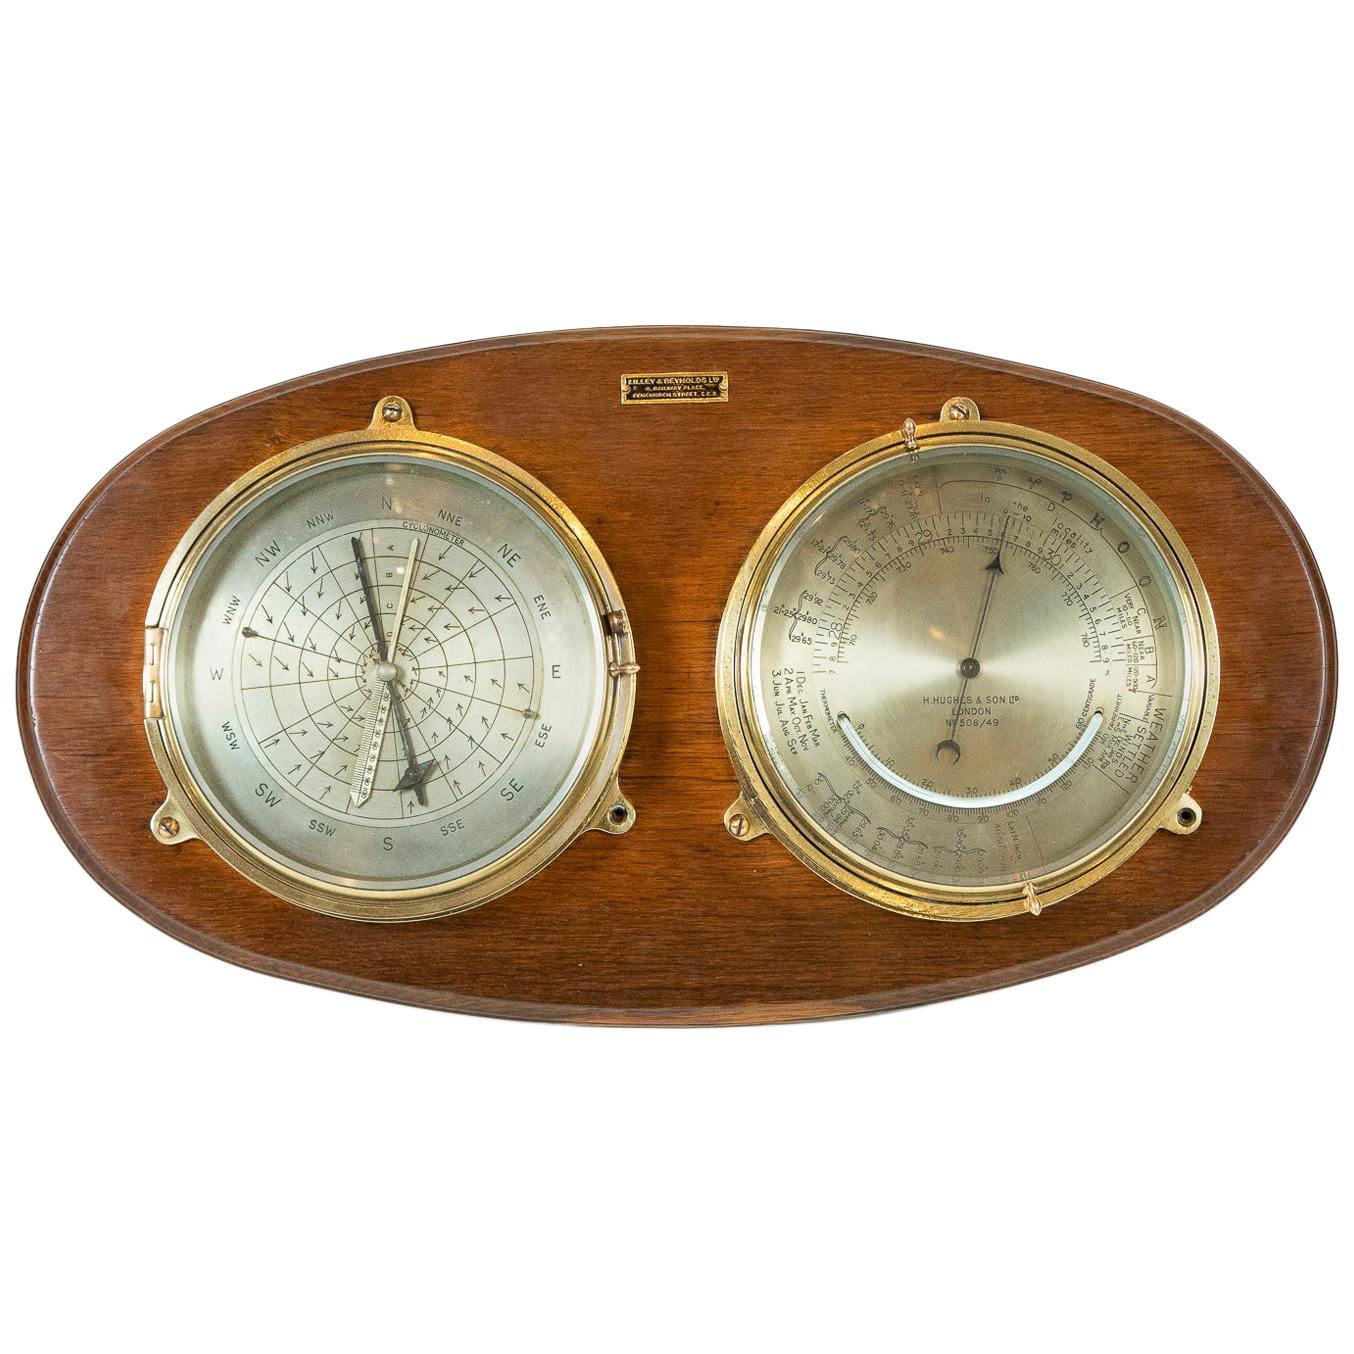 Rare Barocyclonometer by Henry Hughes & Son of London For Sale